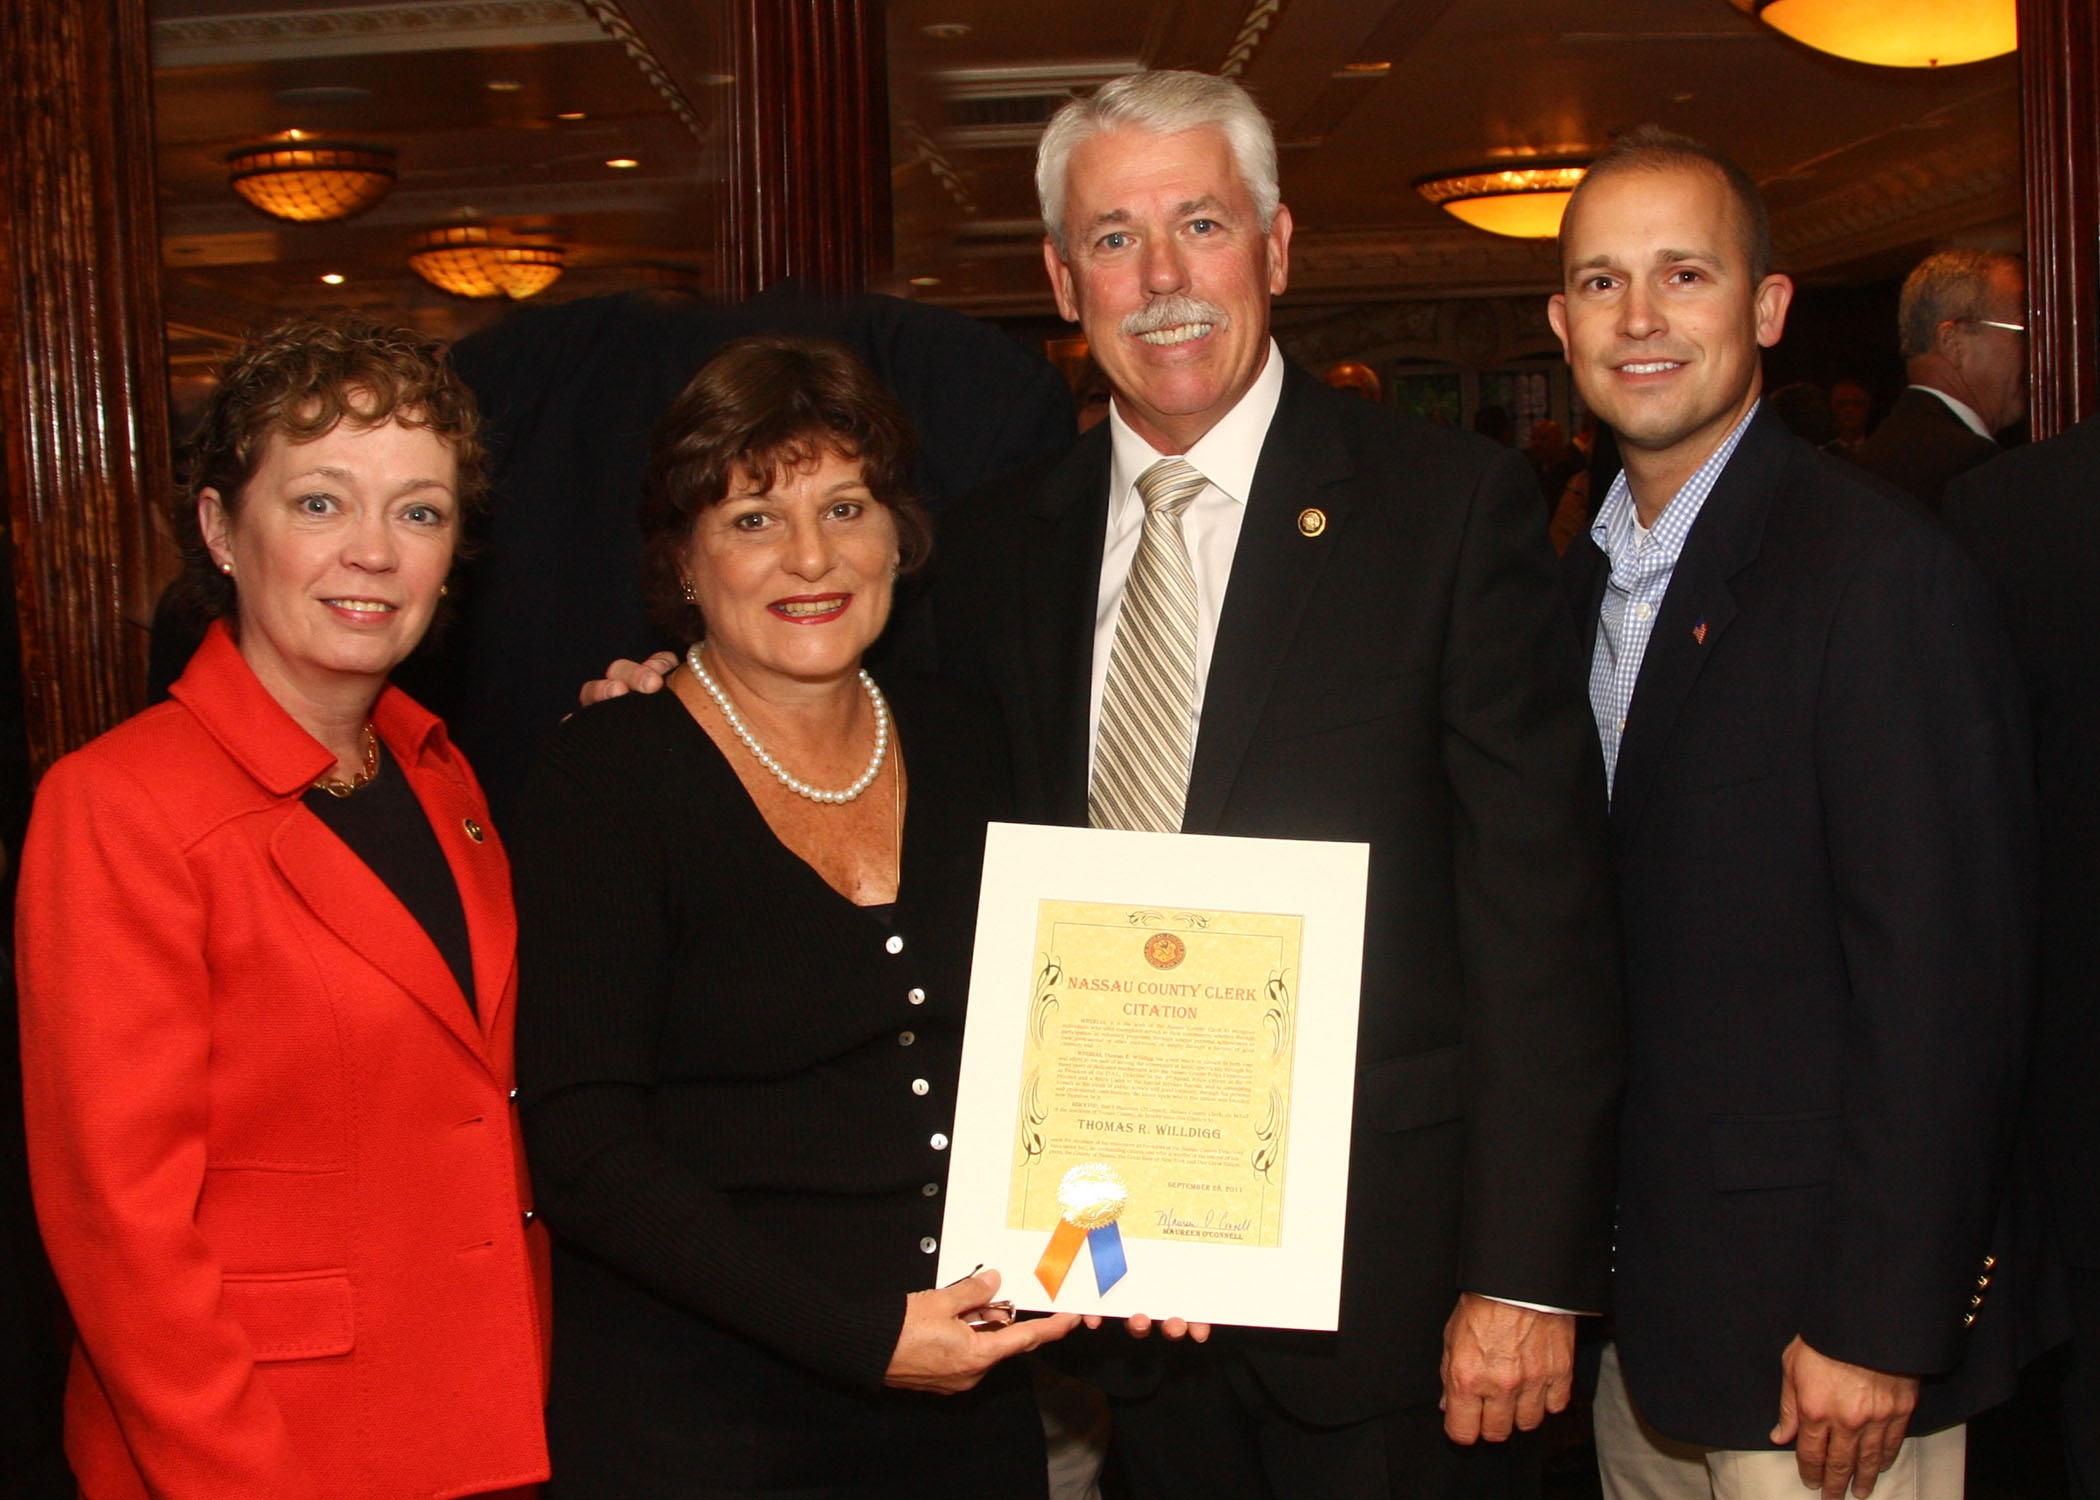 Photo:  Pictured (left to right) are Nassau County Deputy Comptroller Joy Watson, Nassau County Clerk Maureen O'Connell, Detective Thomas Willdigg, and Executive Assistant to the Nassau County Commissioner of Consumer Affairs Kenneth Heino.    